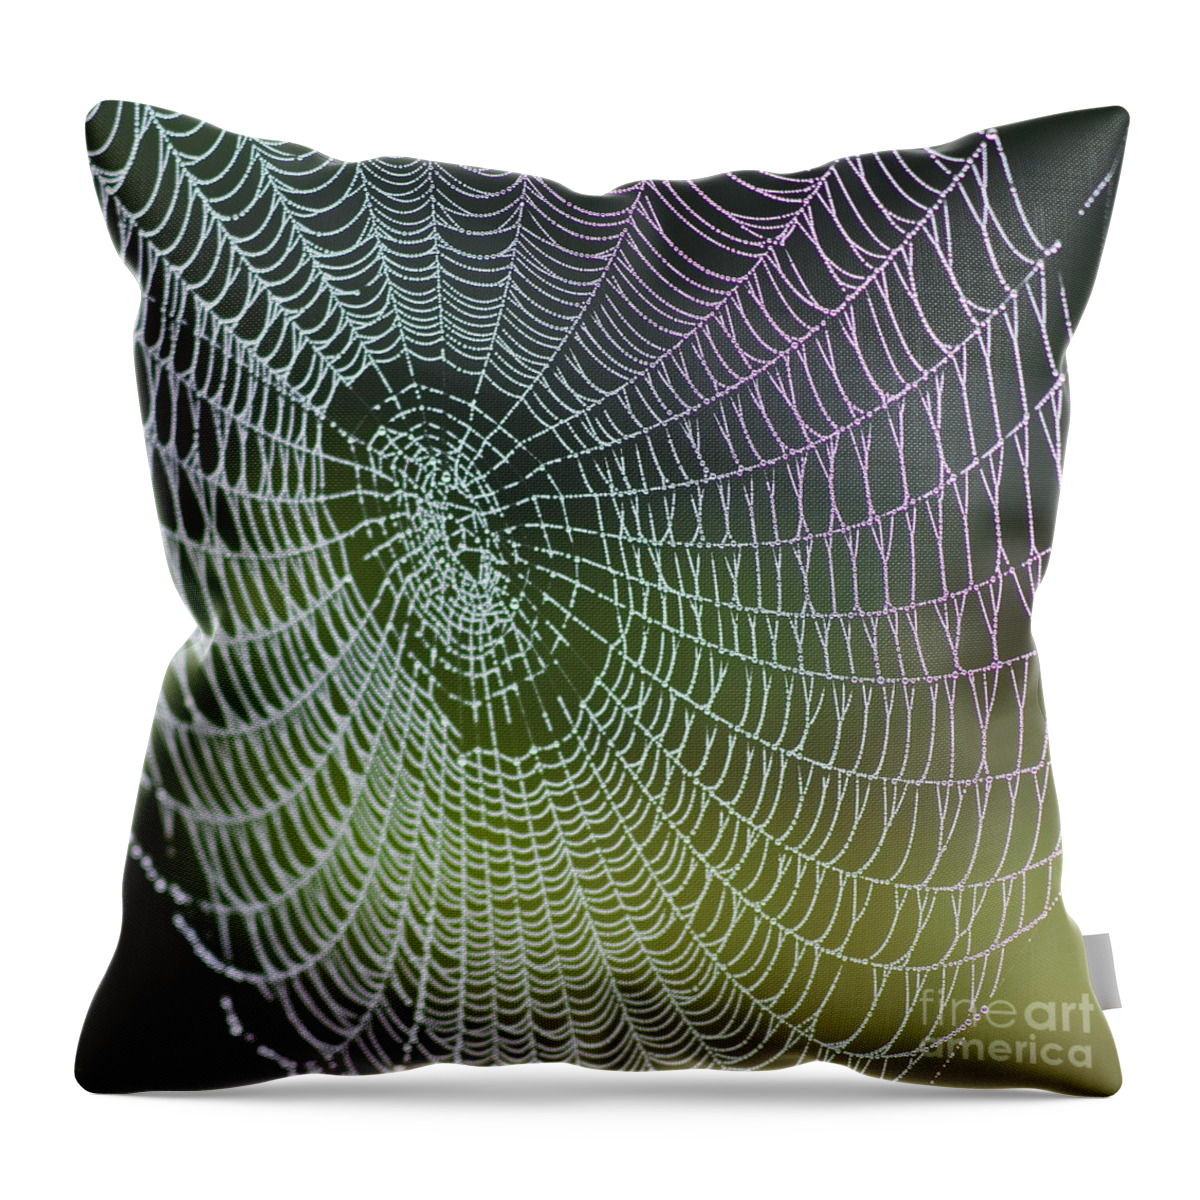 Spiderweb Throw Pillow featuring the photograph Spider Web by Heiko Koehrer-Wagner